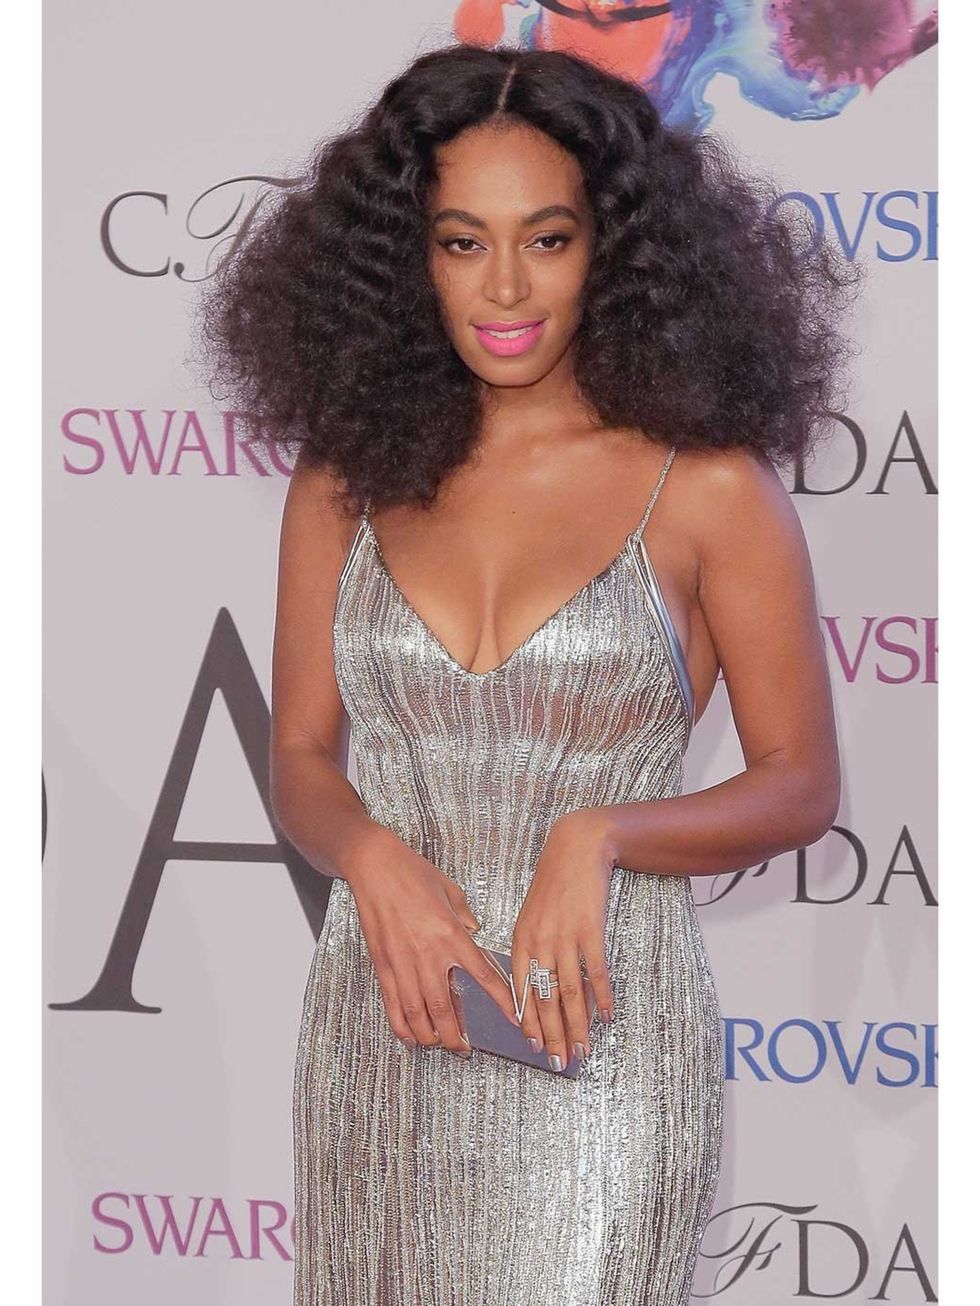 <p><a href="http://www.elleuk.com/star-style/celebrity-style-files/solange-knowles">Solange Knowles</a> wears Calvin Klein Collection at the 2014 CFDA Fashion Awards.</p>